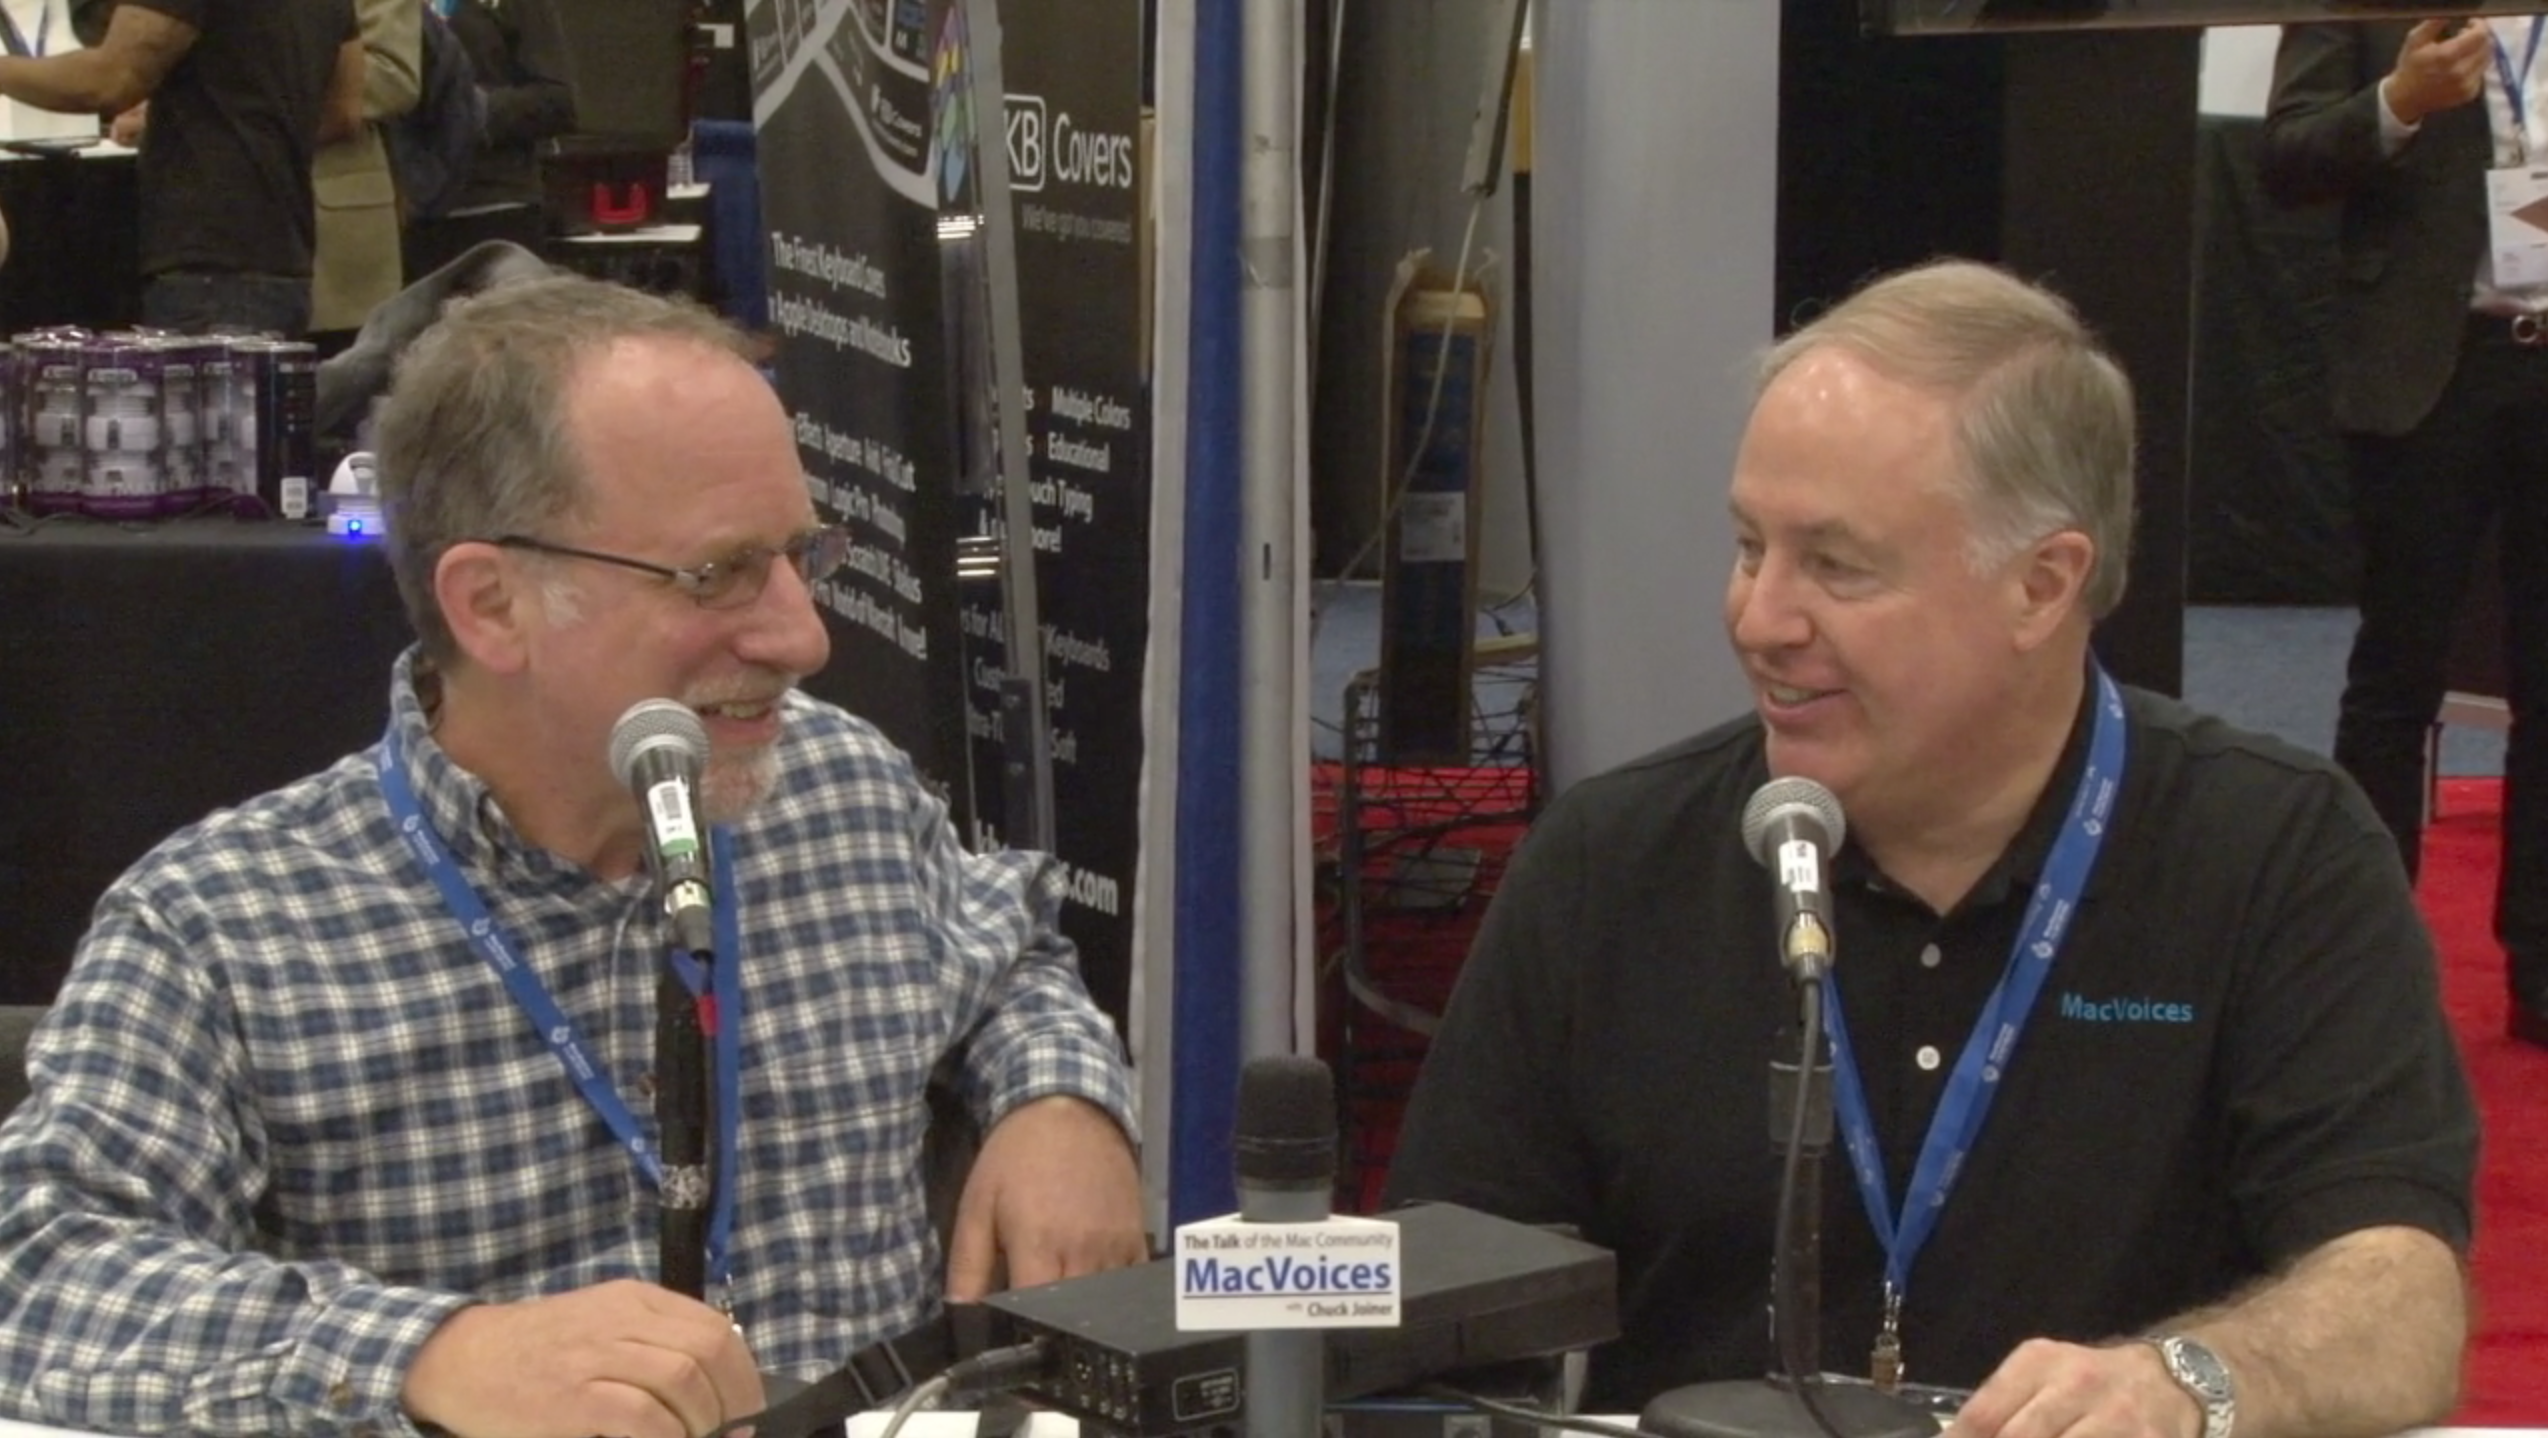 MacVoices #1385: Macworld 2013 – Ted Landau Picks His Show Favorites and Discusses the Event’s Success